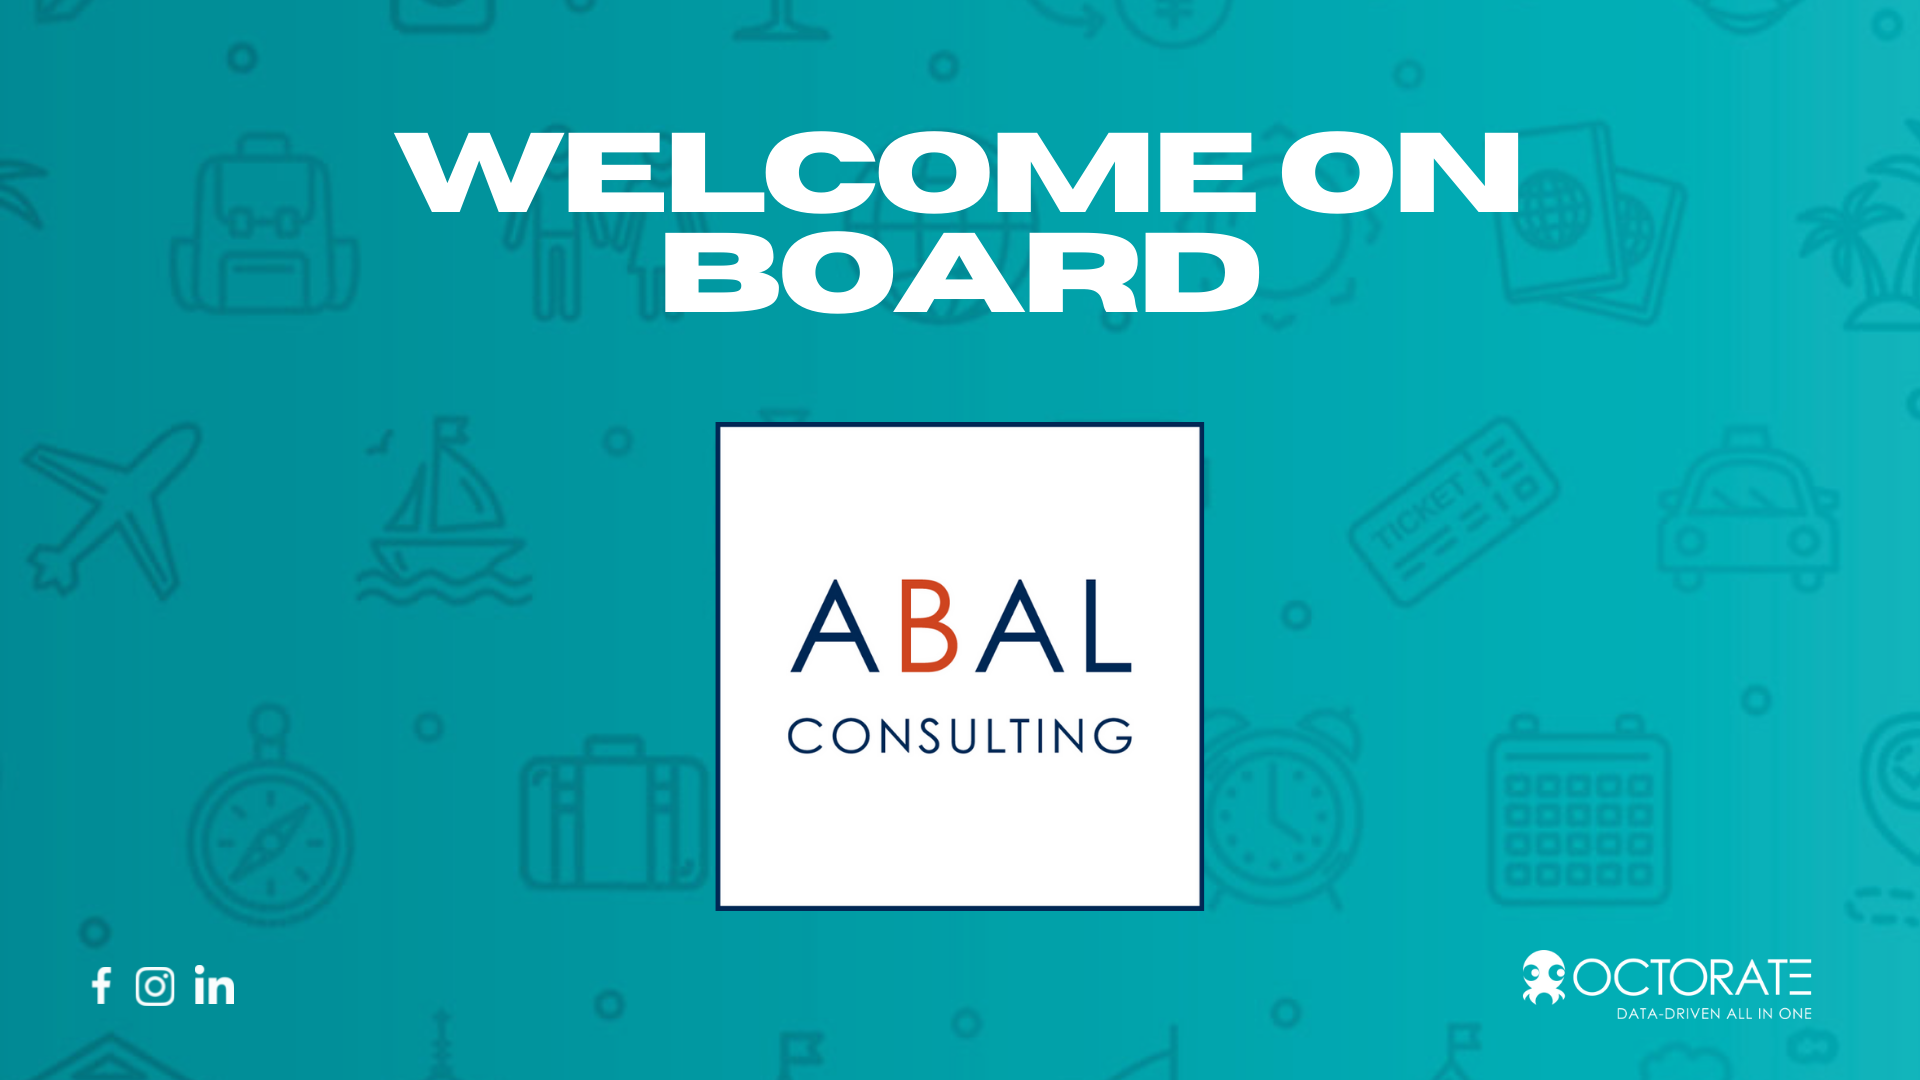 Abal Consulting Octorate nuova partnership